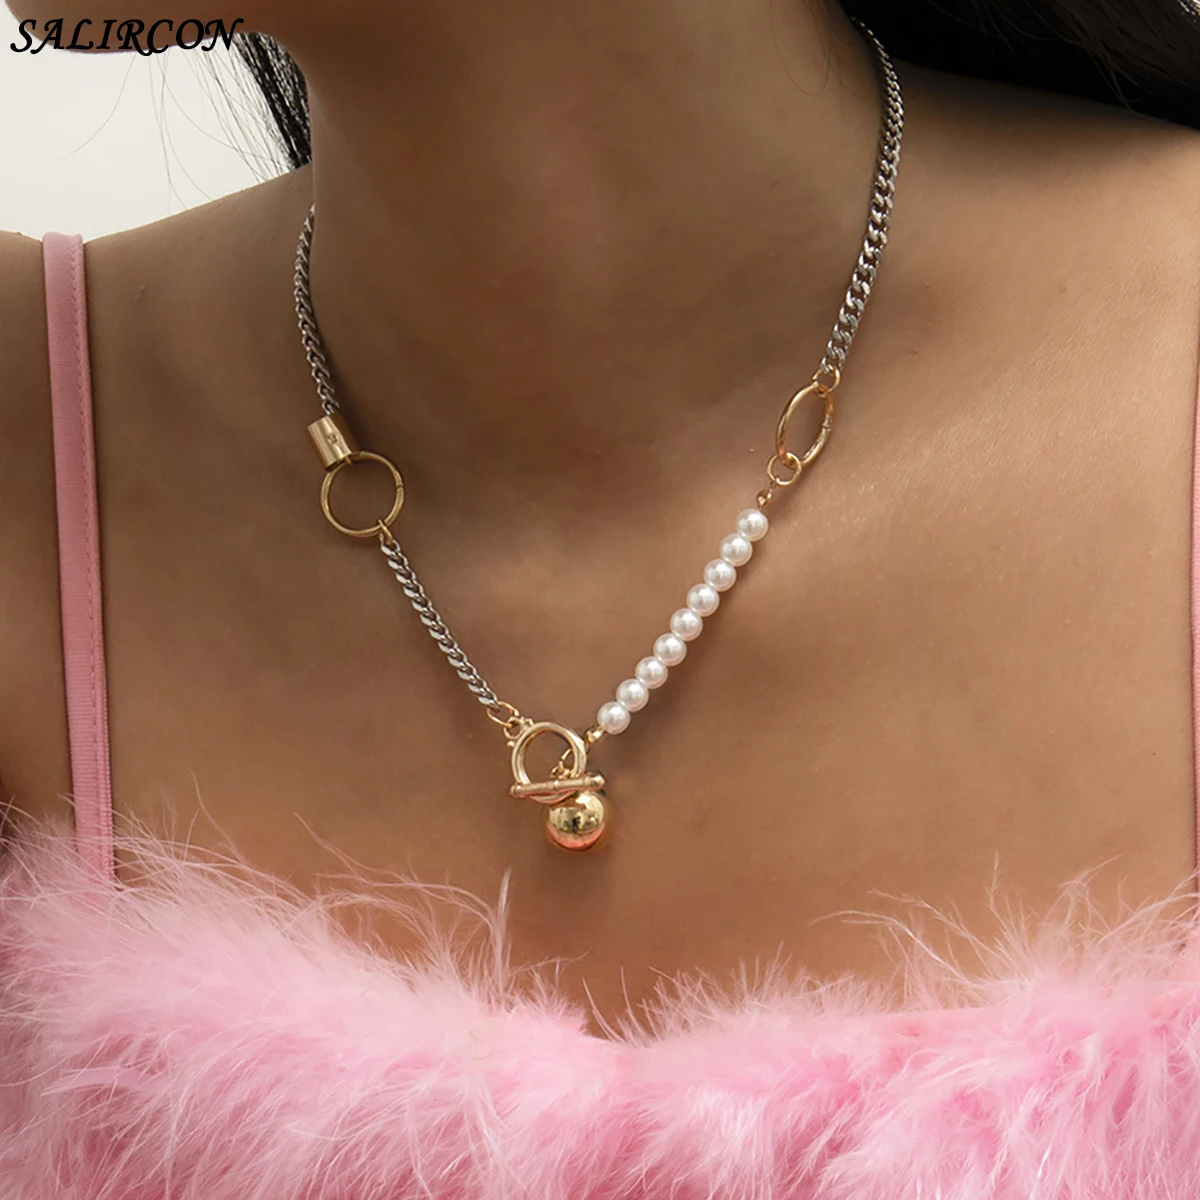 

Salircon Goth Imitation Pearl Beads Pendant Necklace for Women Kpop Aesthetic Link Chain Necklace Vintage Couple Jewelry Gift